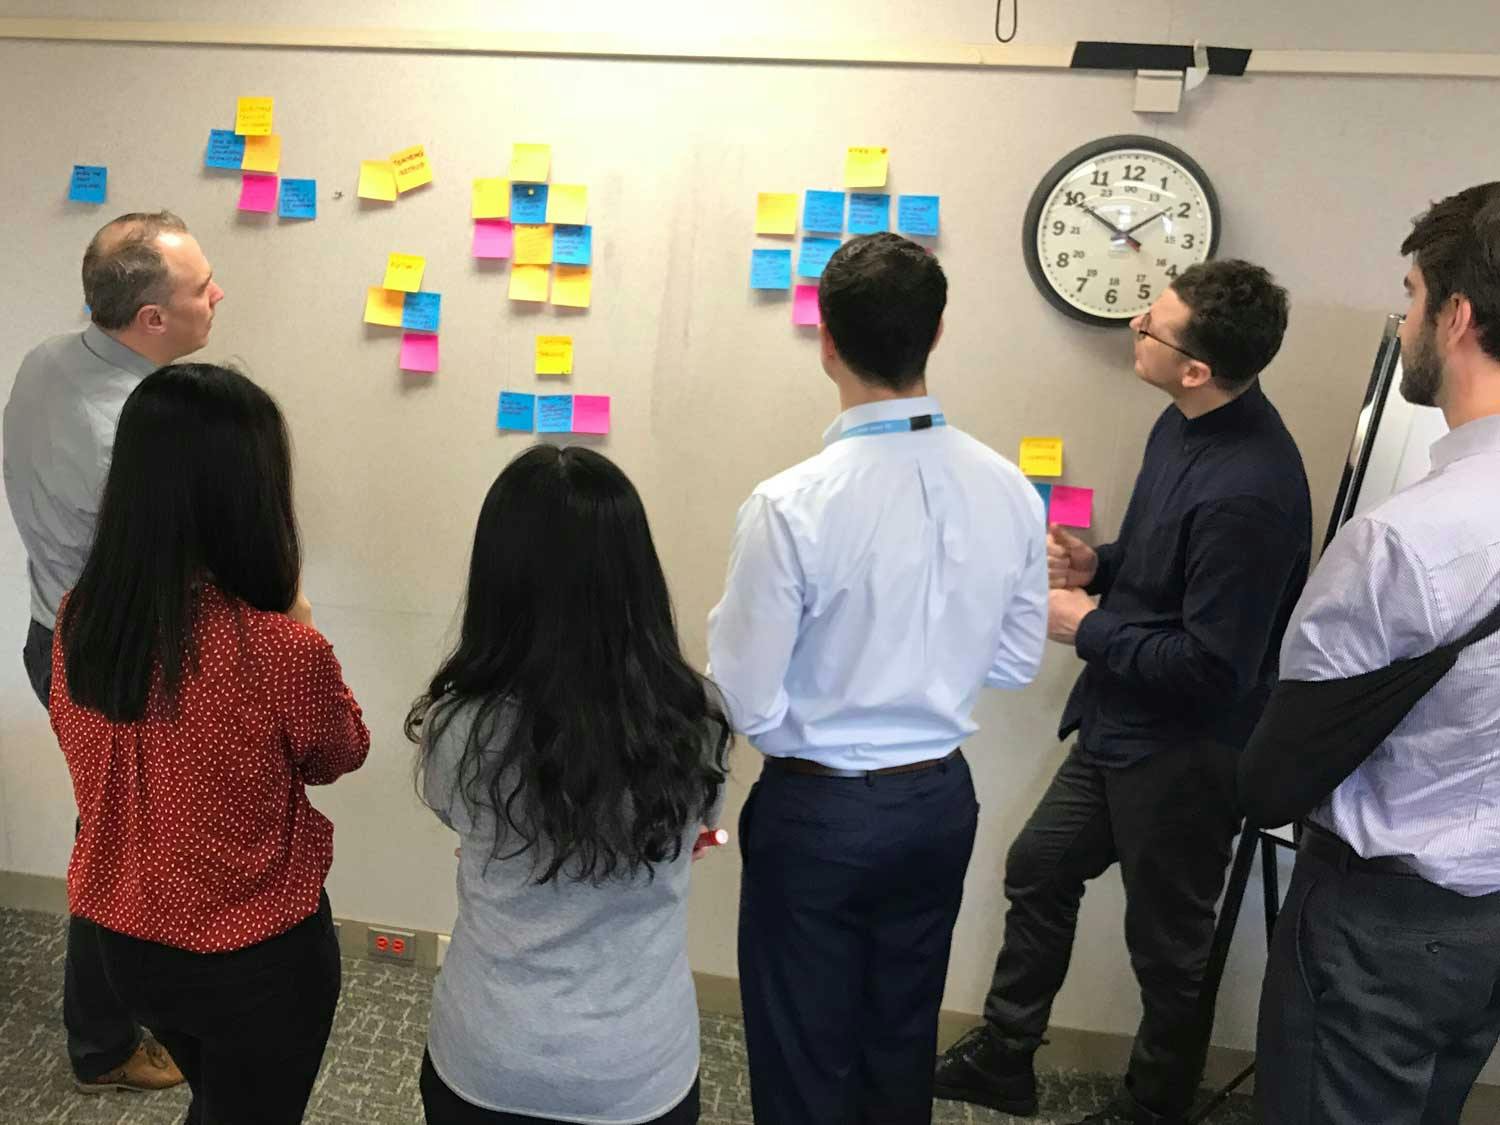 6 people gather around sticky notes on a white-board